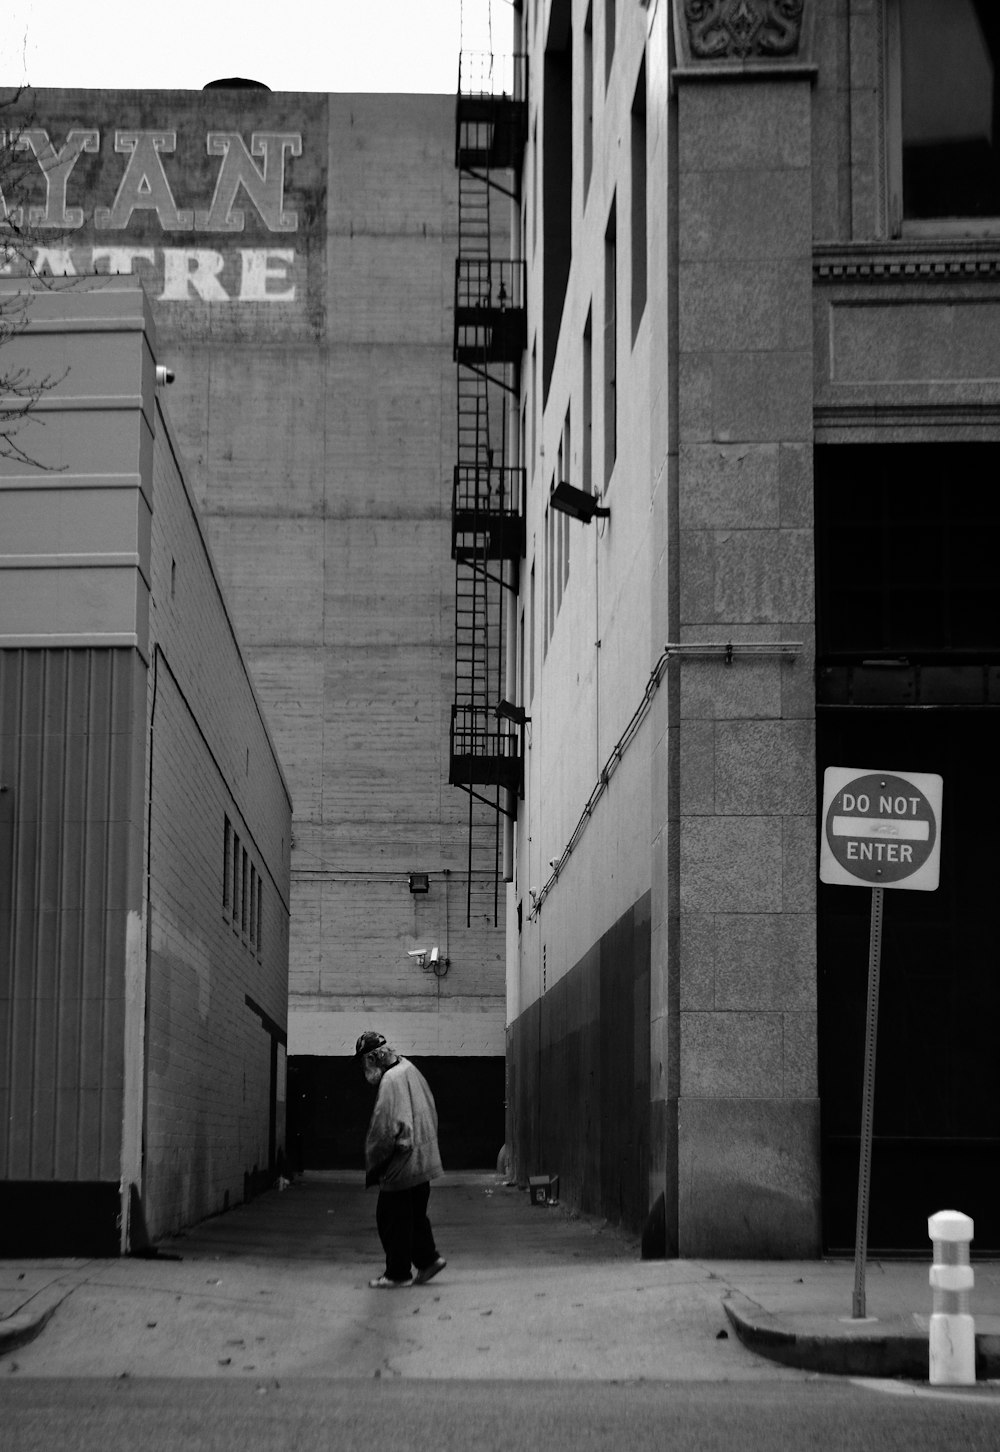 person walking on alley